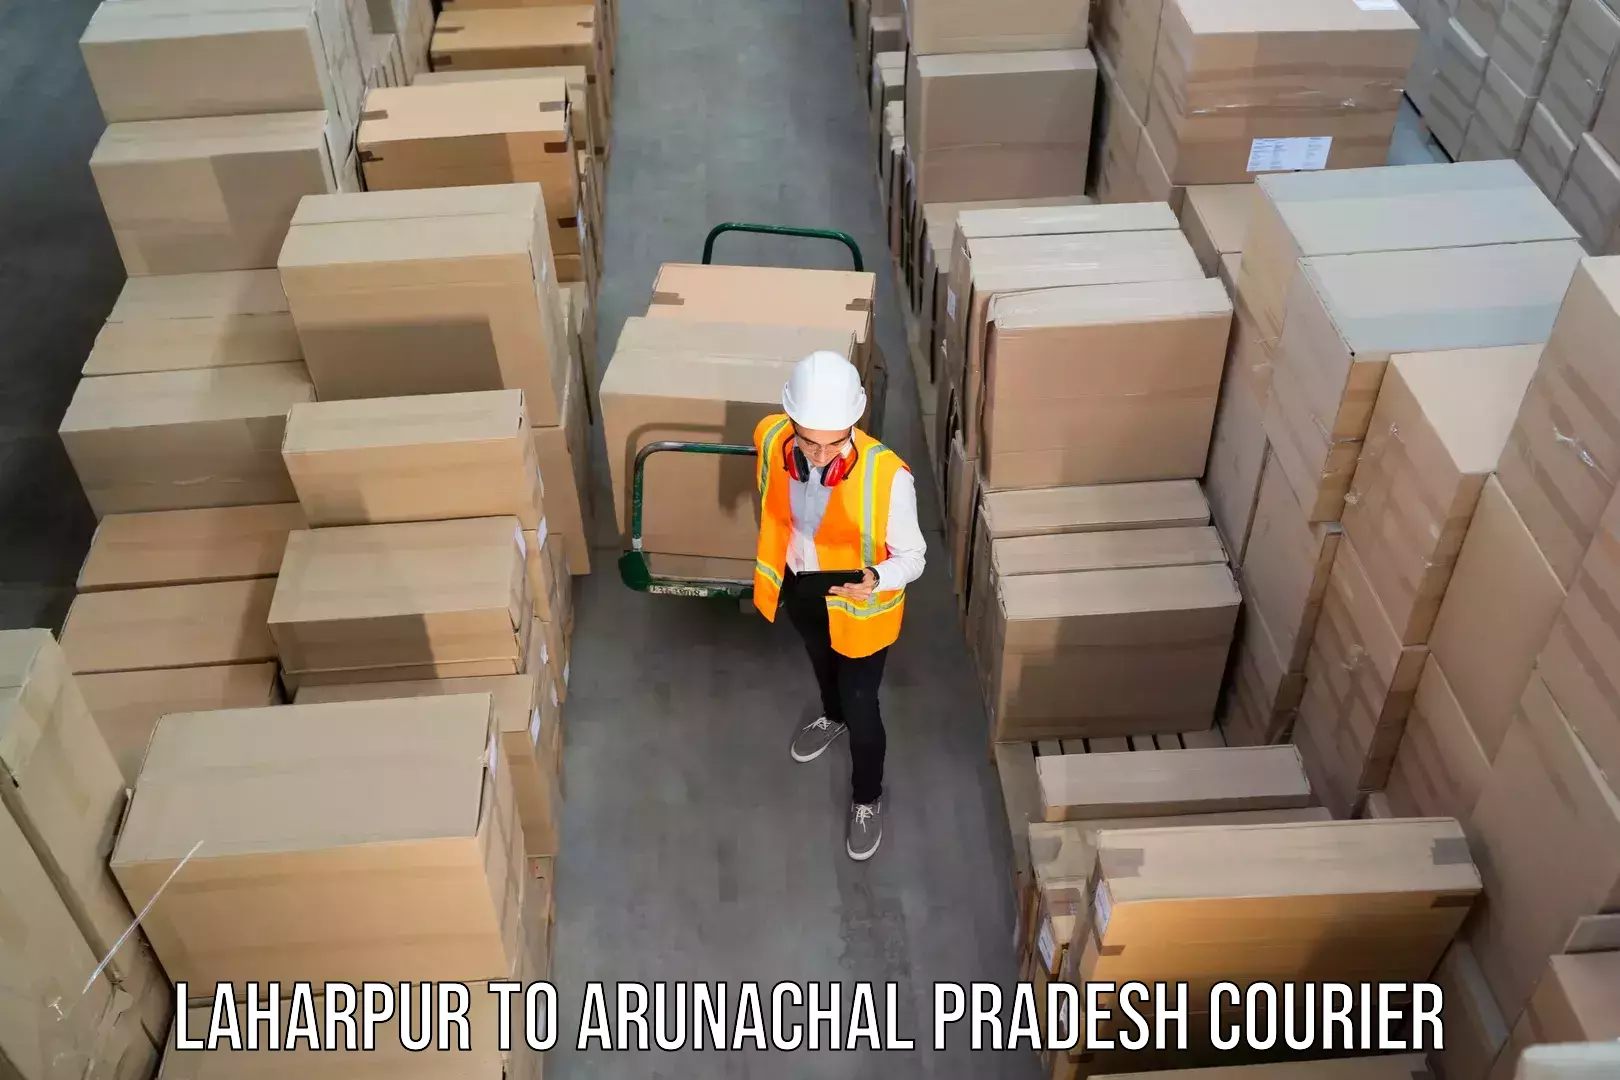 Courier service booking in Laharpur to Tezu